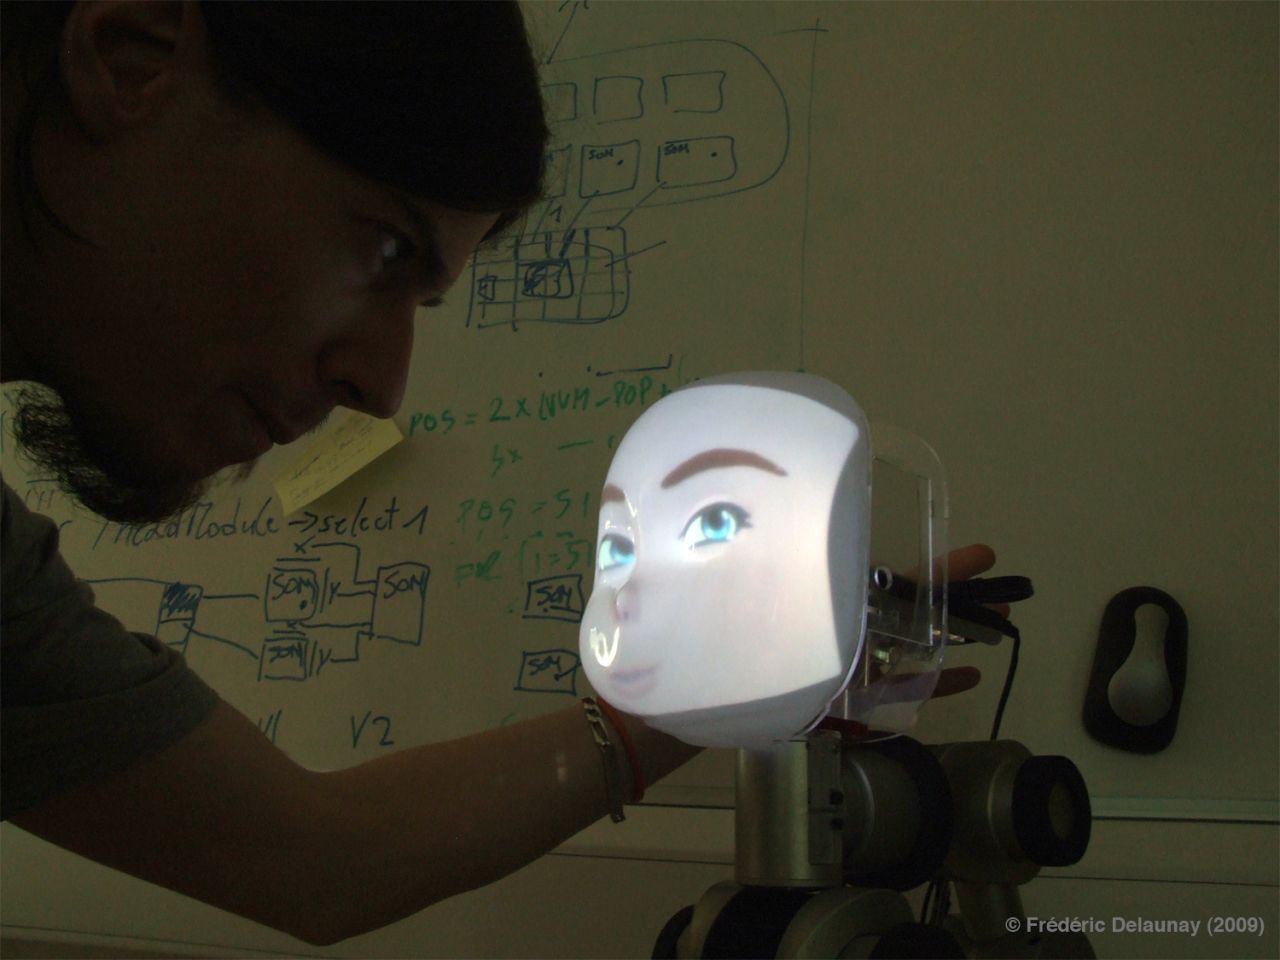 The "Concept" project is the work of the University of Plymouth, in the UK. Computer-generated responses are projected onto its "face," which contains cameras and microphones.